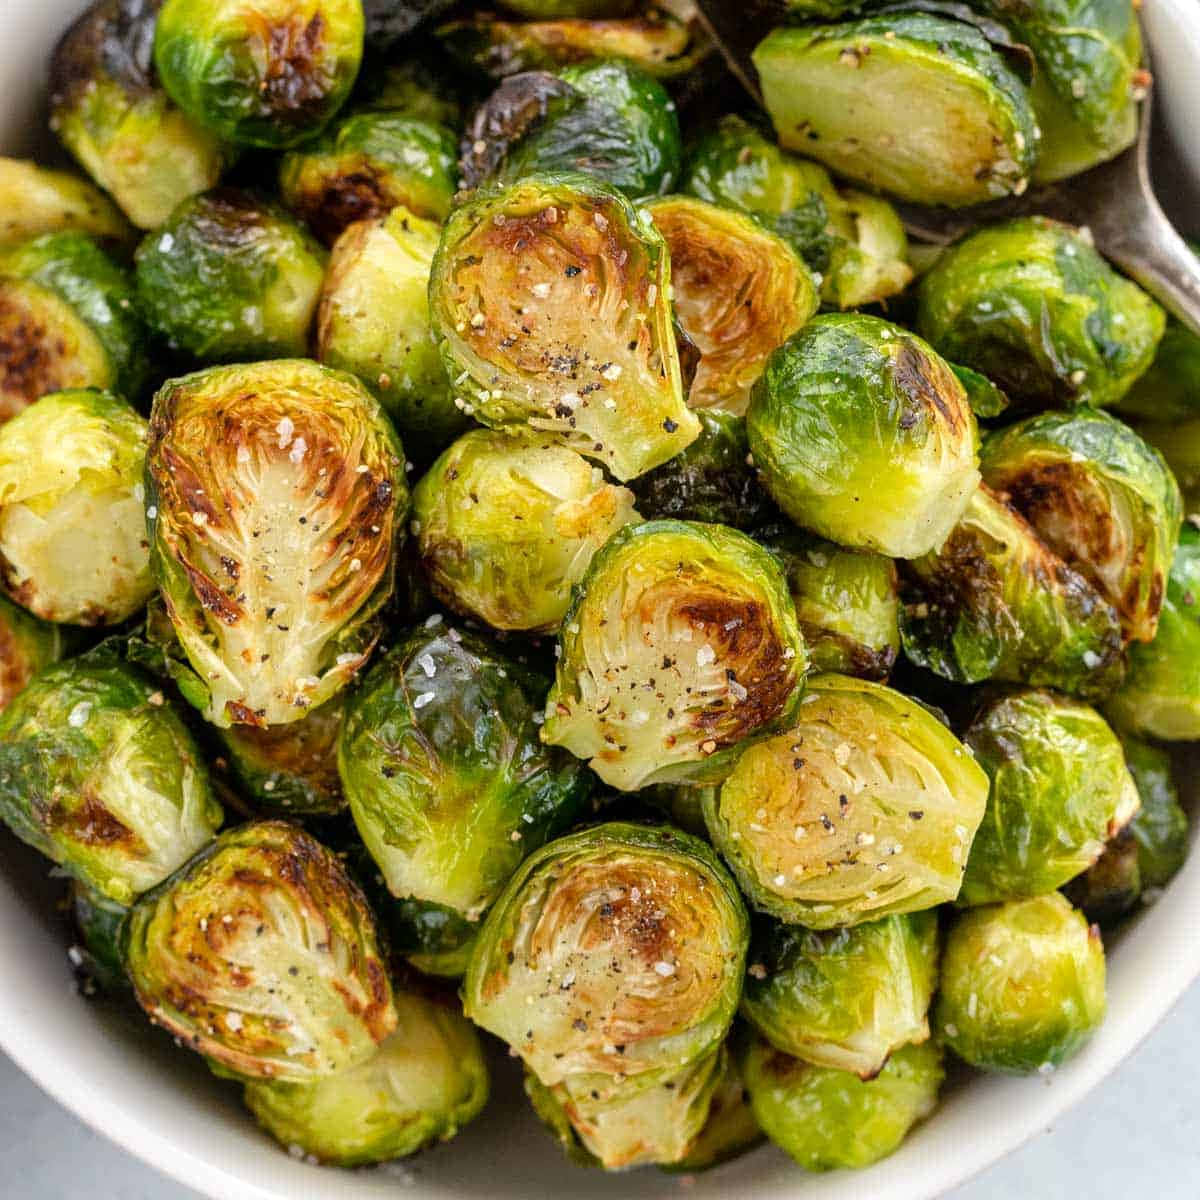 A close up of delicious crispy brussel sprouts.